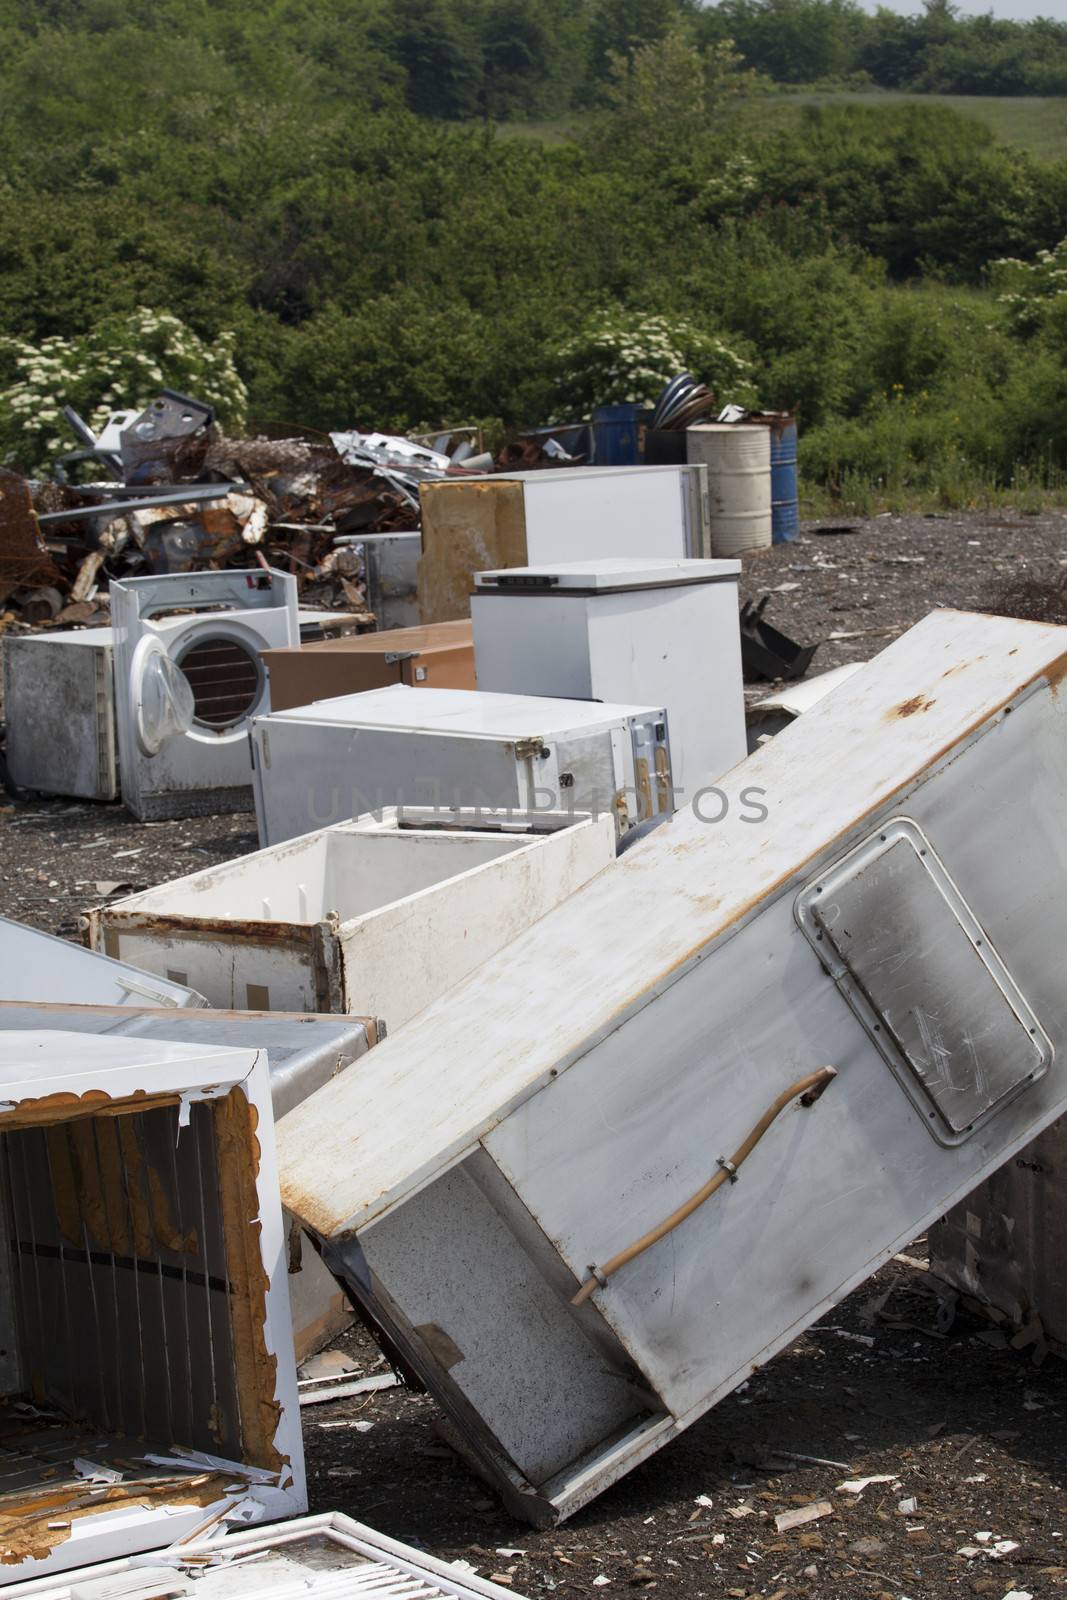 Appliances at the landfill by wellphoto